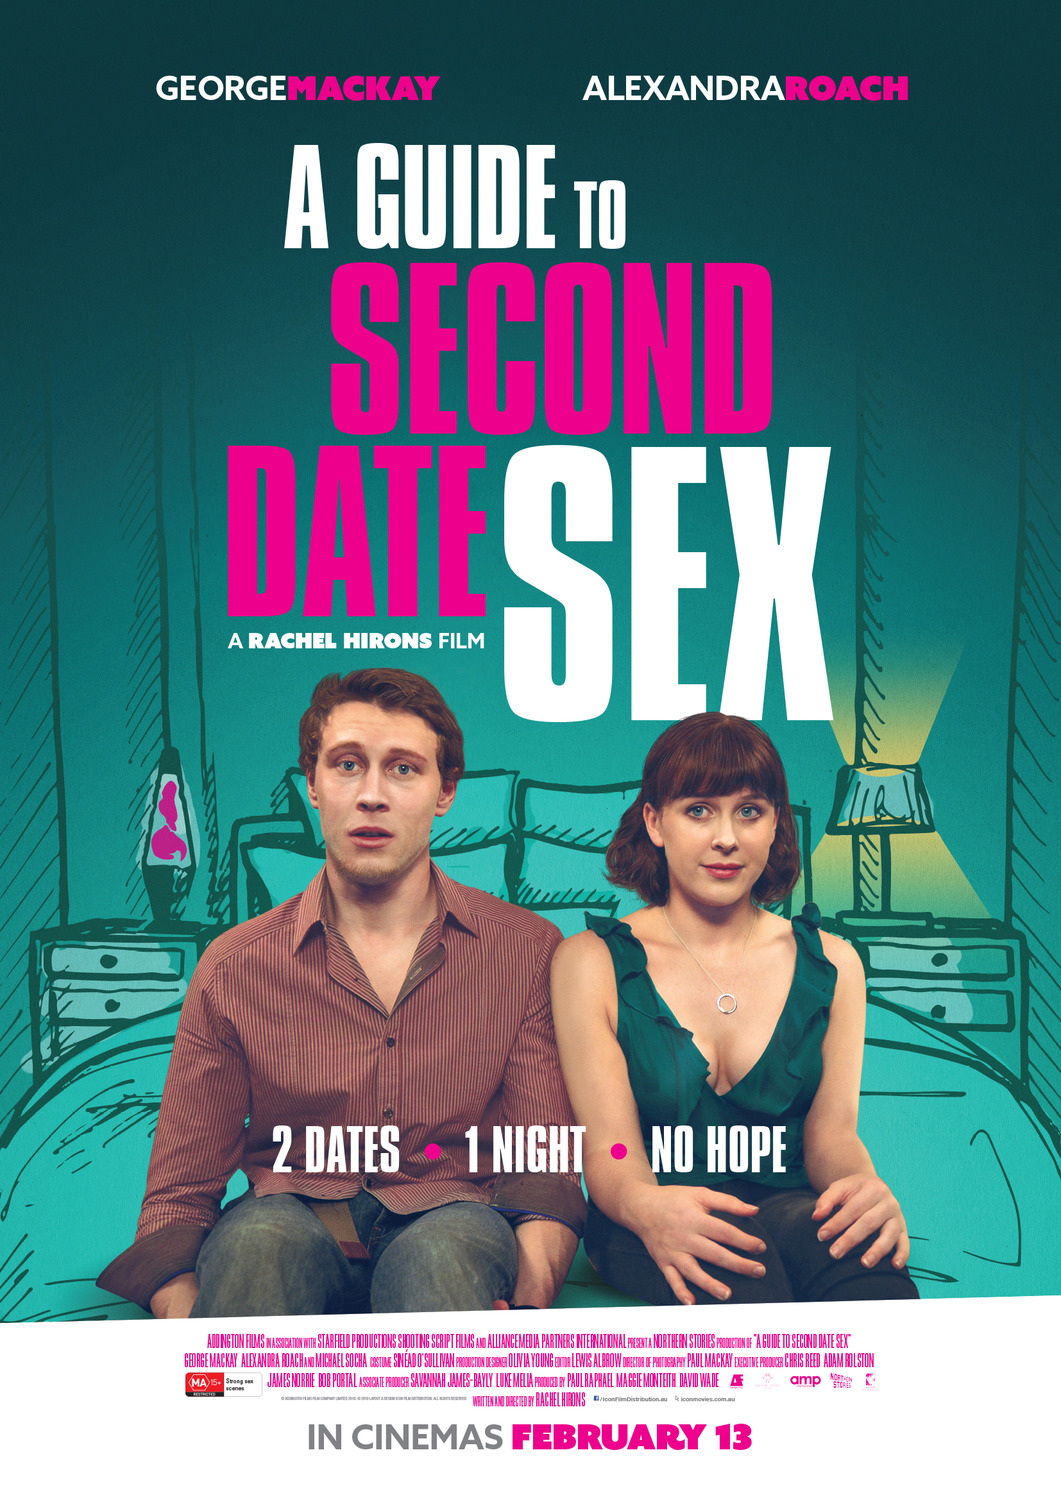 Extra Large Movie Poster Image for A Guide to Second Date Sex 